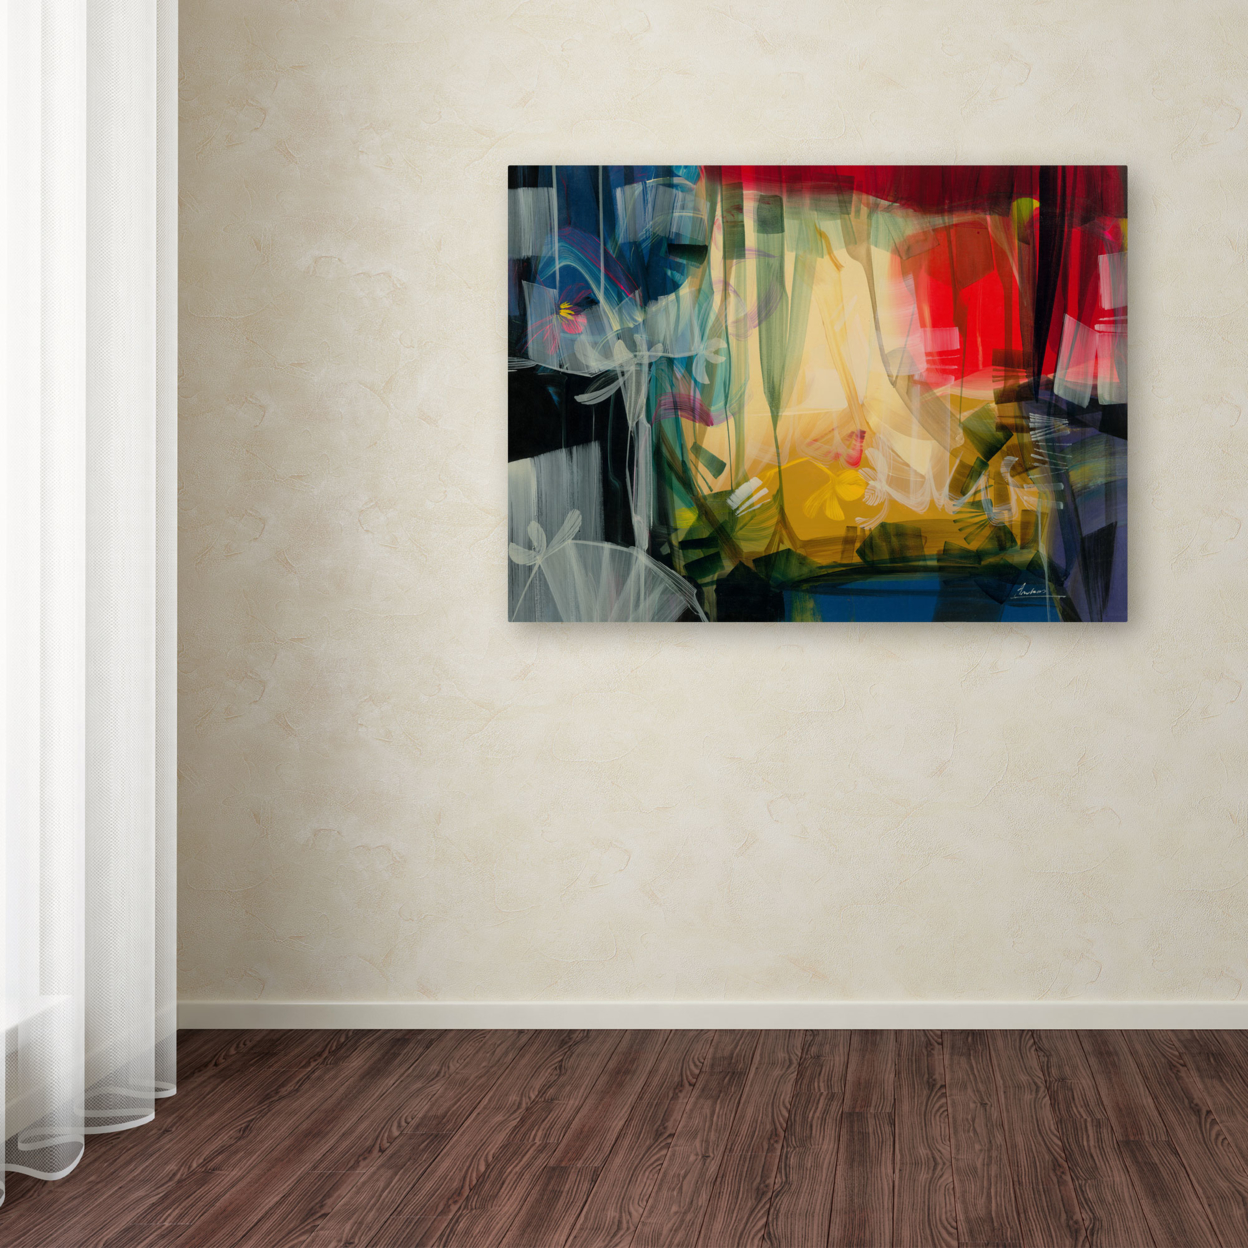 Andrea 'Amhaus' Canvas Wall Art 35 X 47 Inches